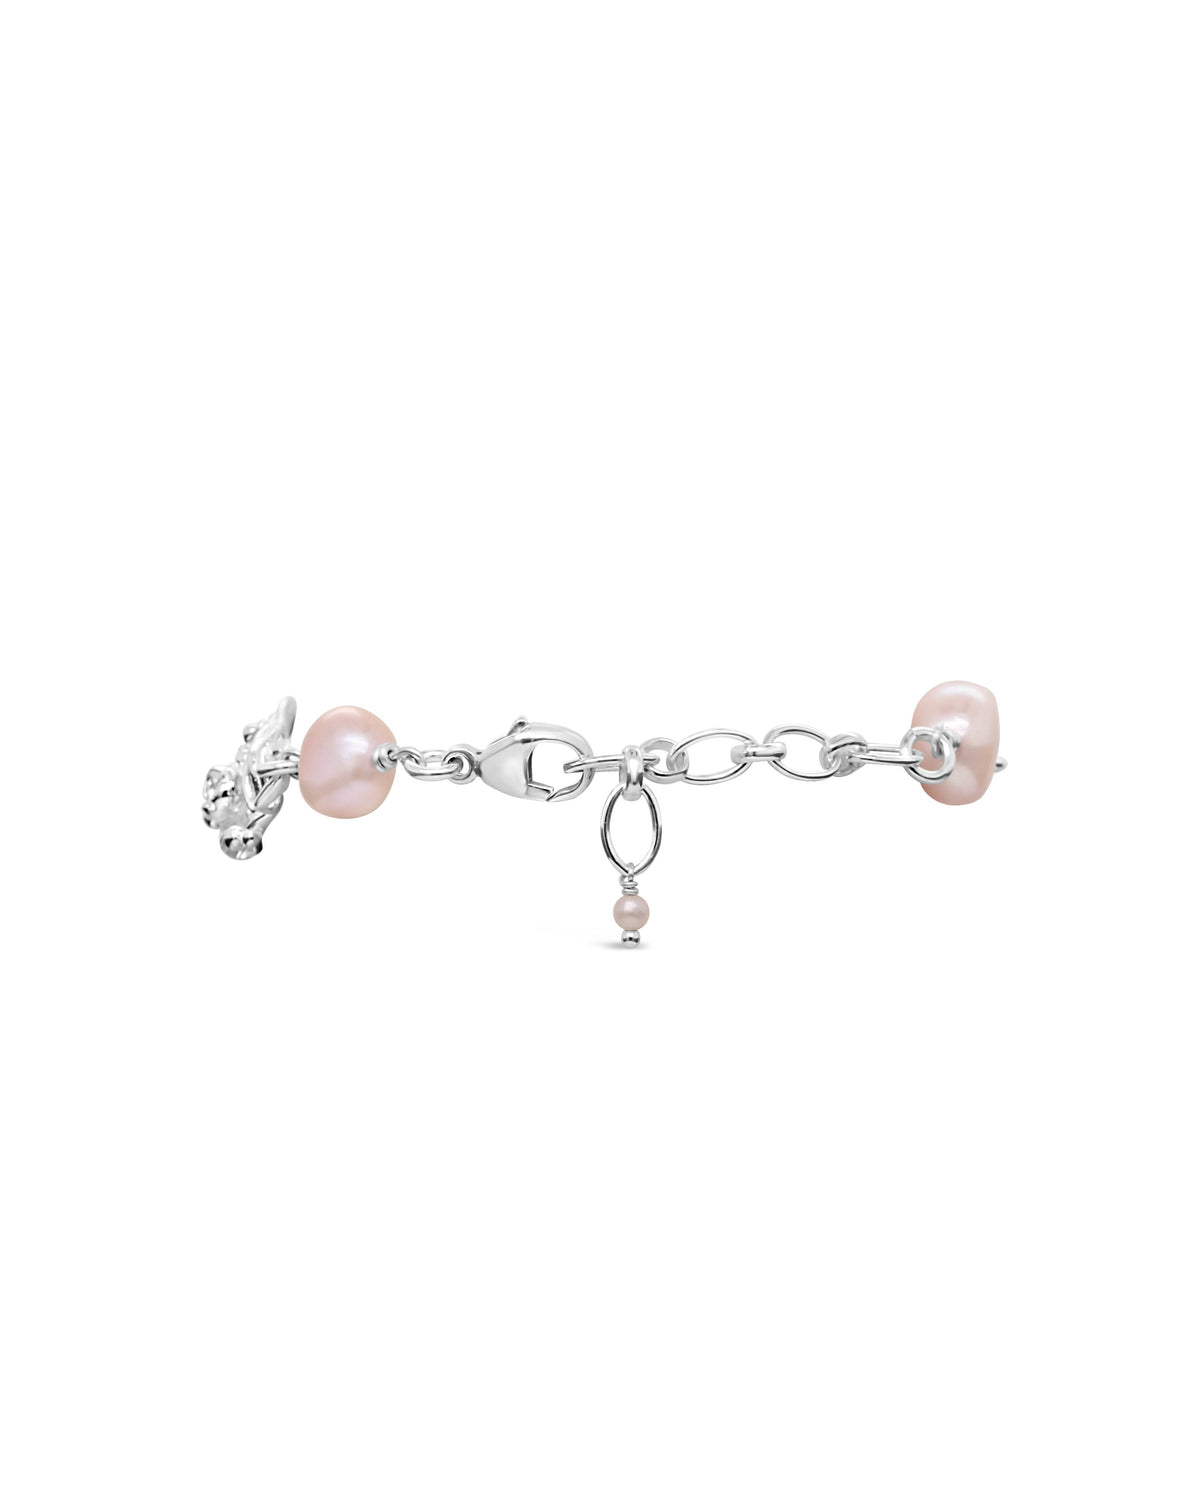 Under the Sea ~ Barnacle Link (Small) Pearl Bracelet